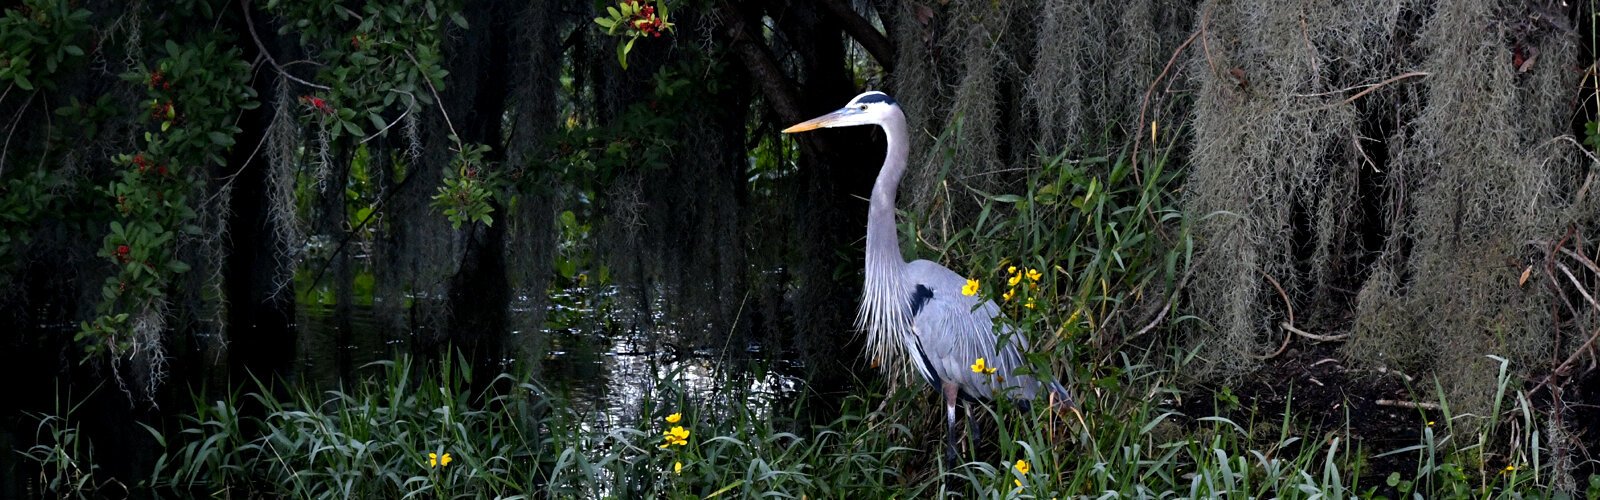 Great blue herons are ubiquitous, breeding and nesting in Circle B Bar Reserve.